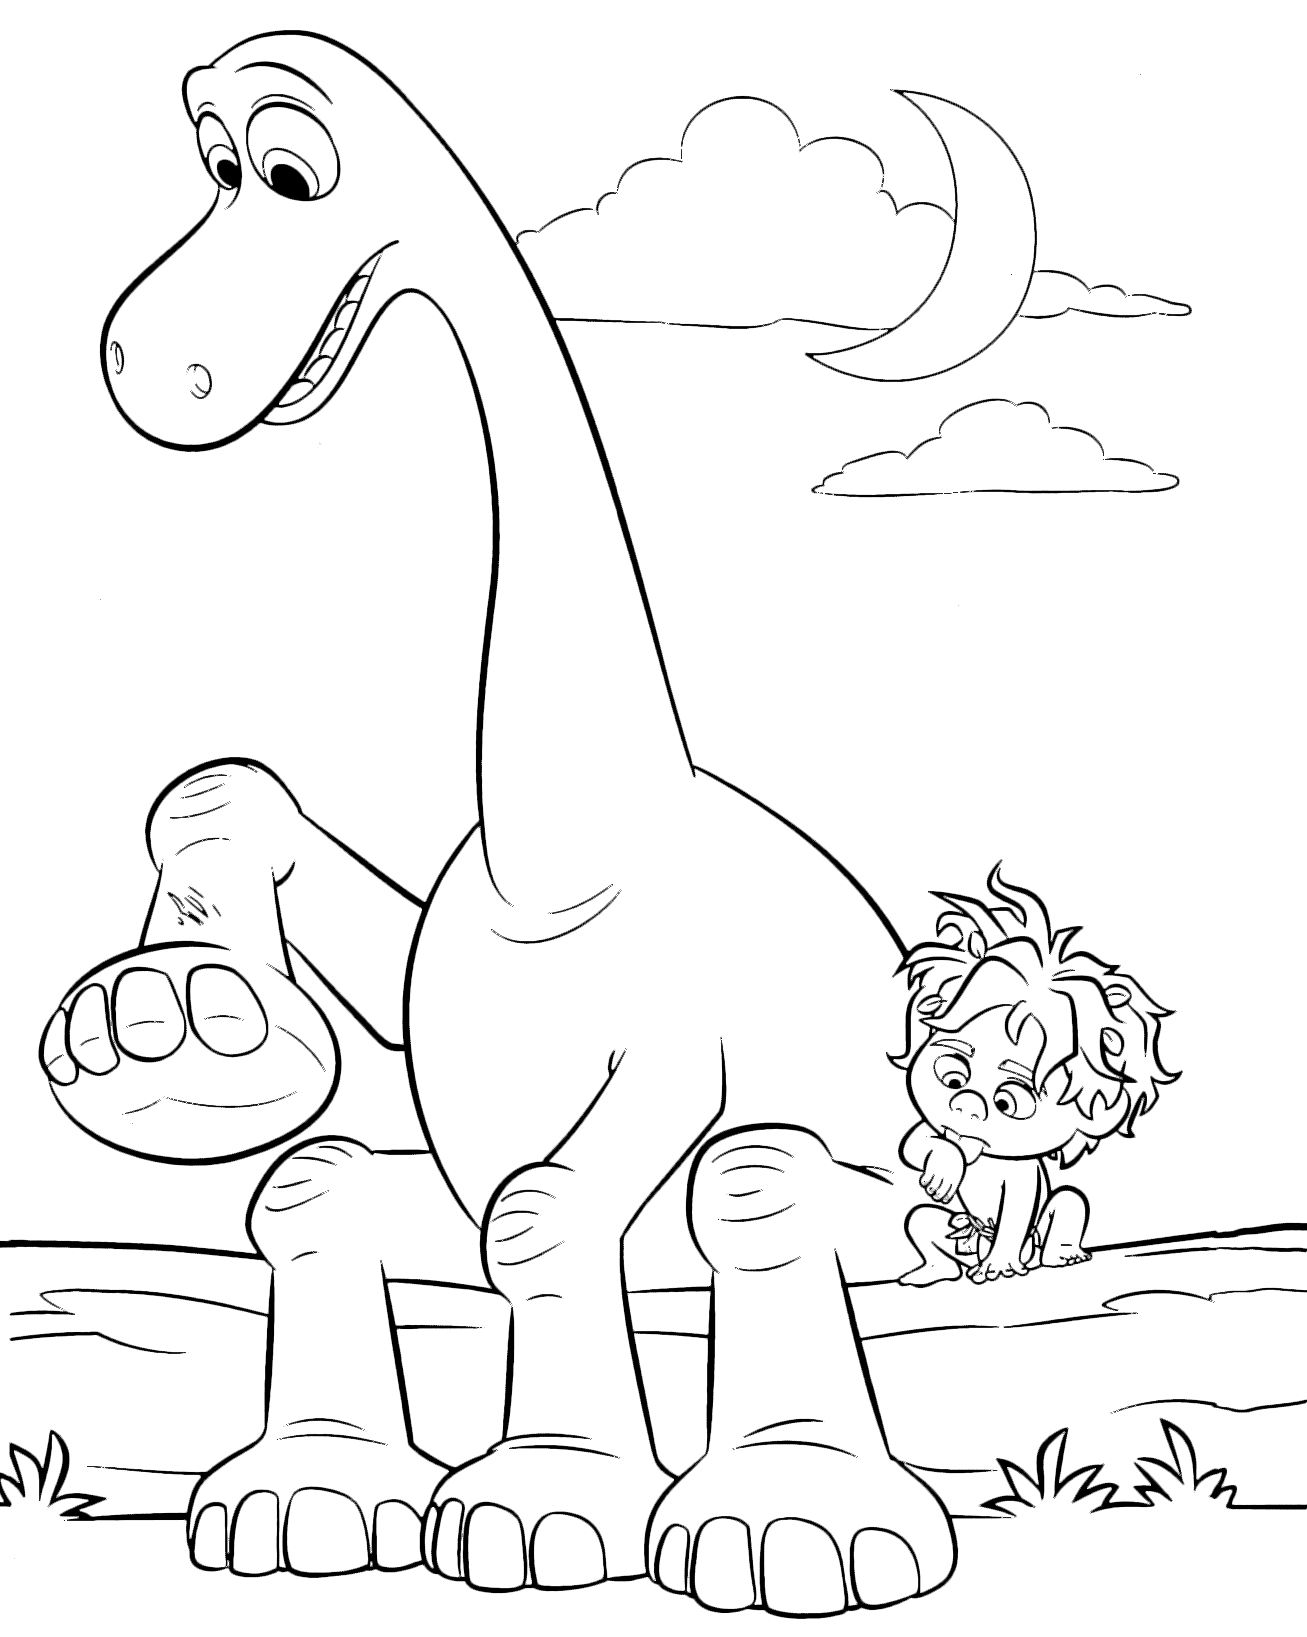 Arlo and Spot lick wounds Coloring Pages